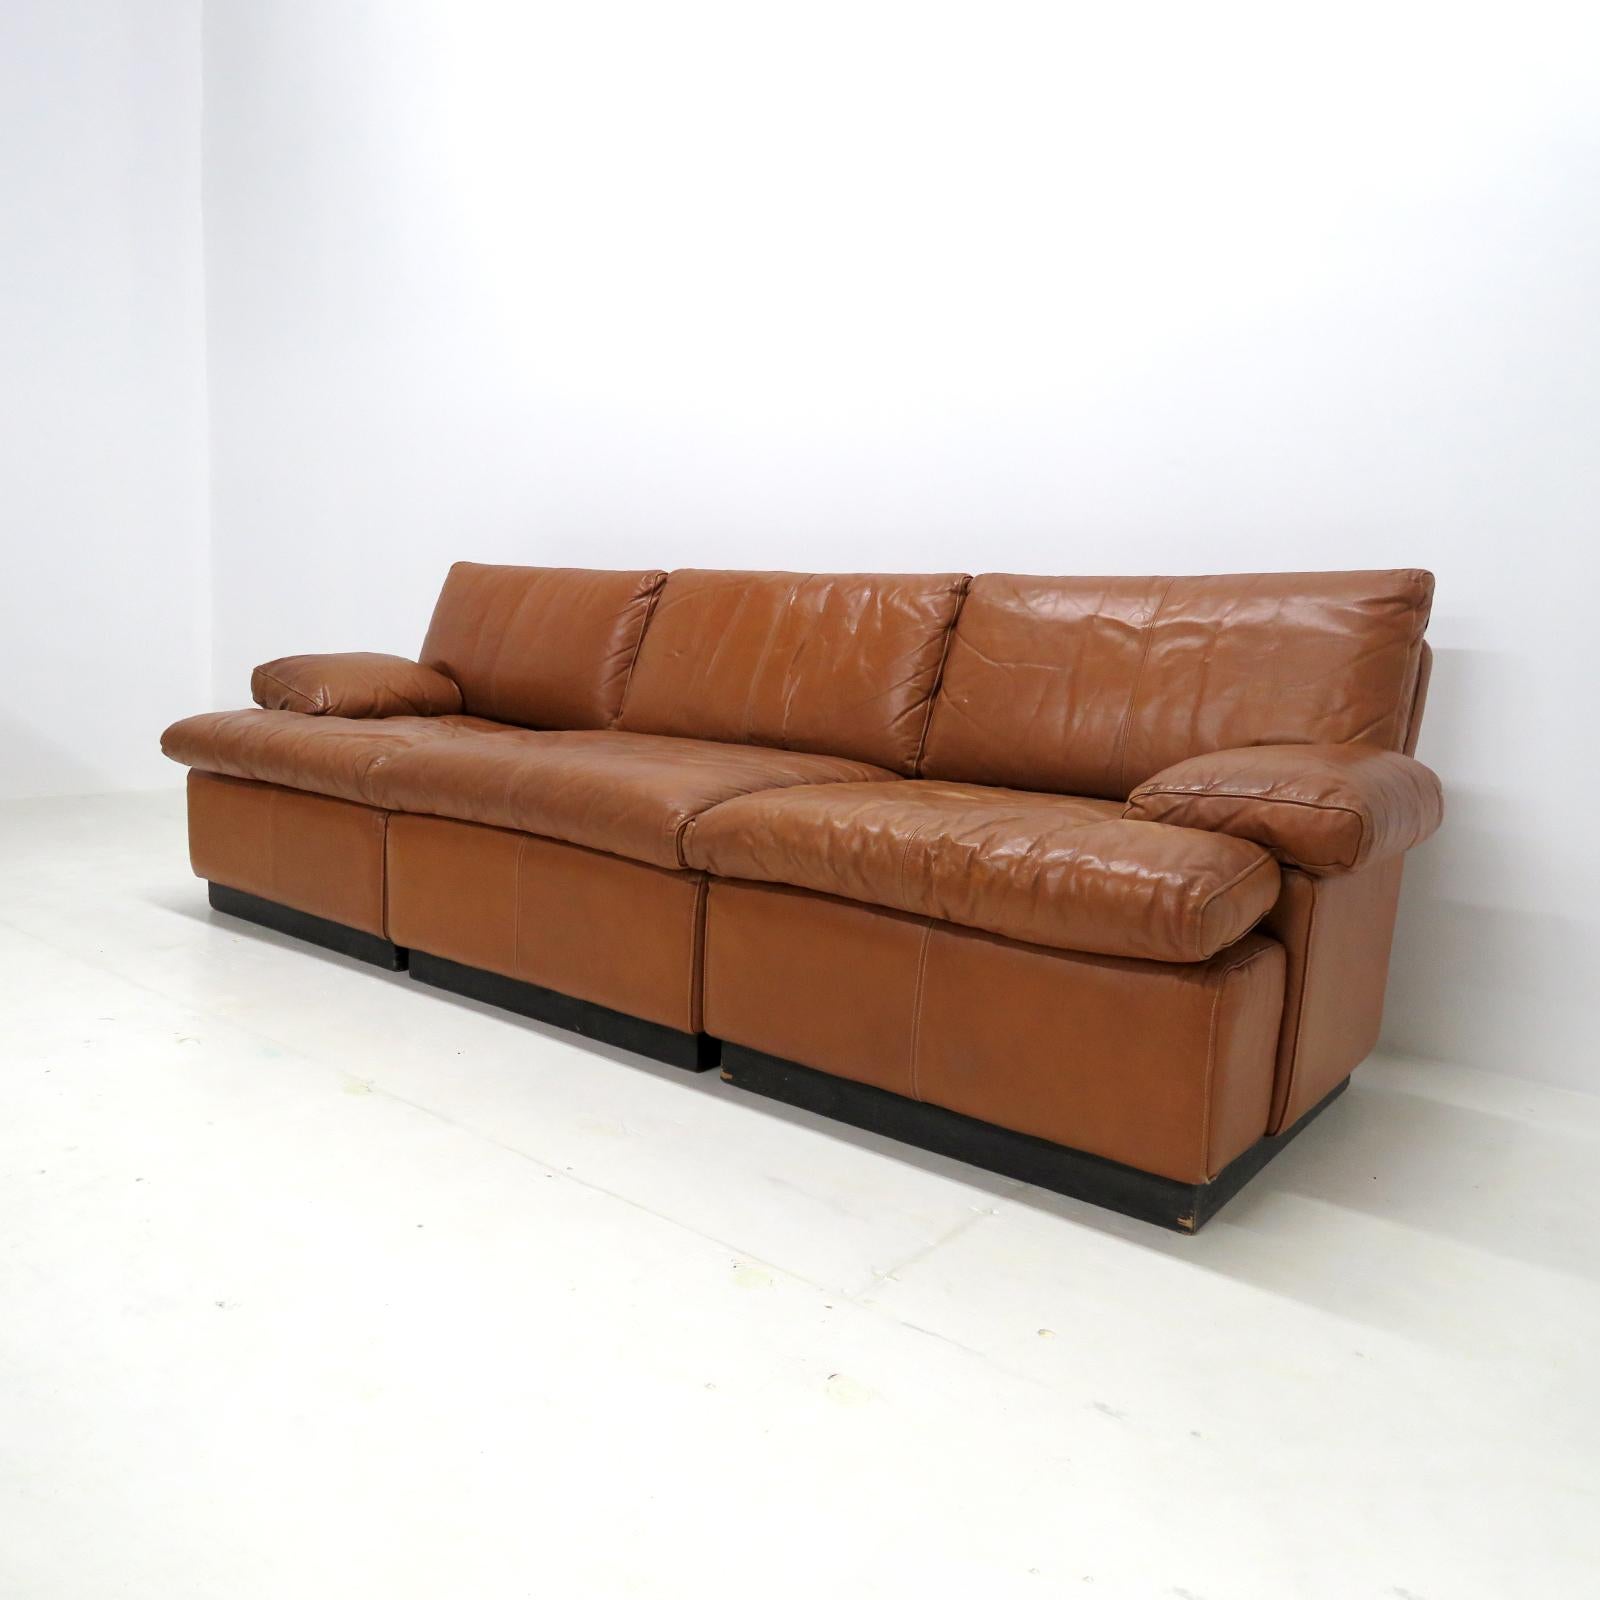 Stained Finnish Modular Leather Sofa by BJ Dahlquist, 1970 For Sale